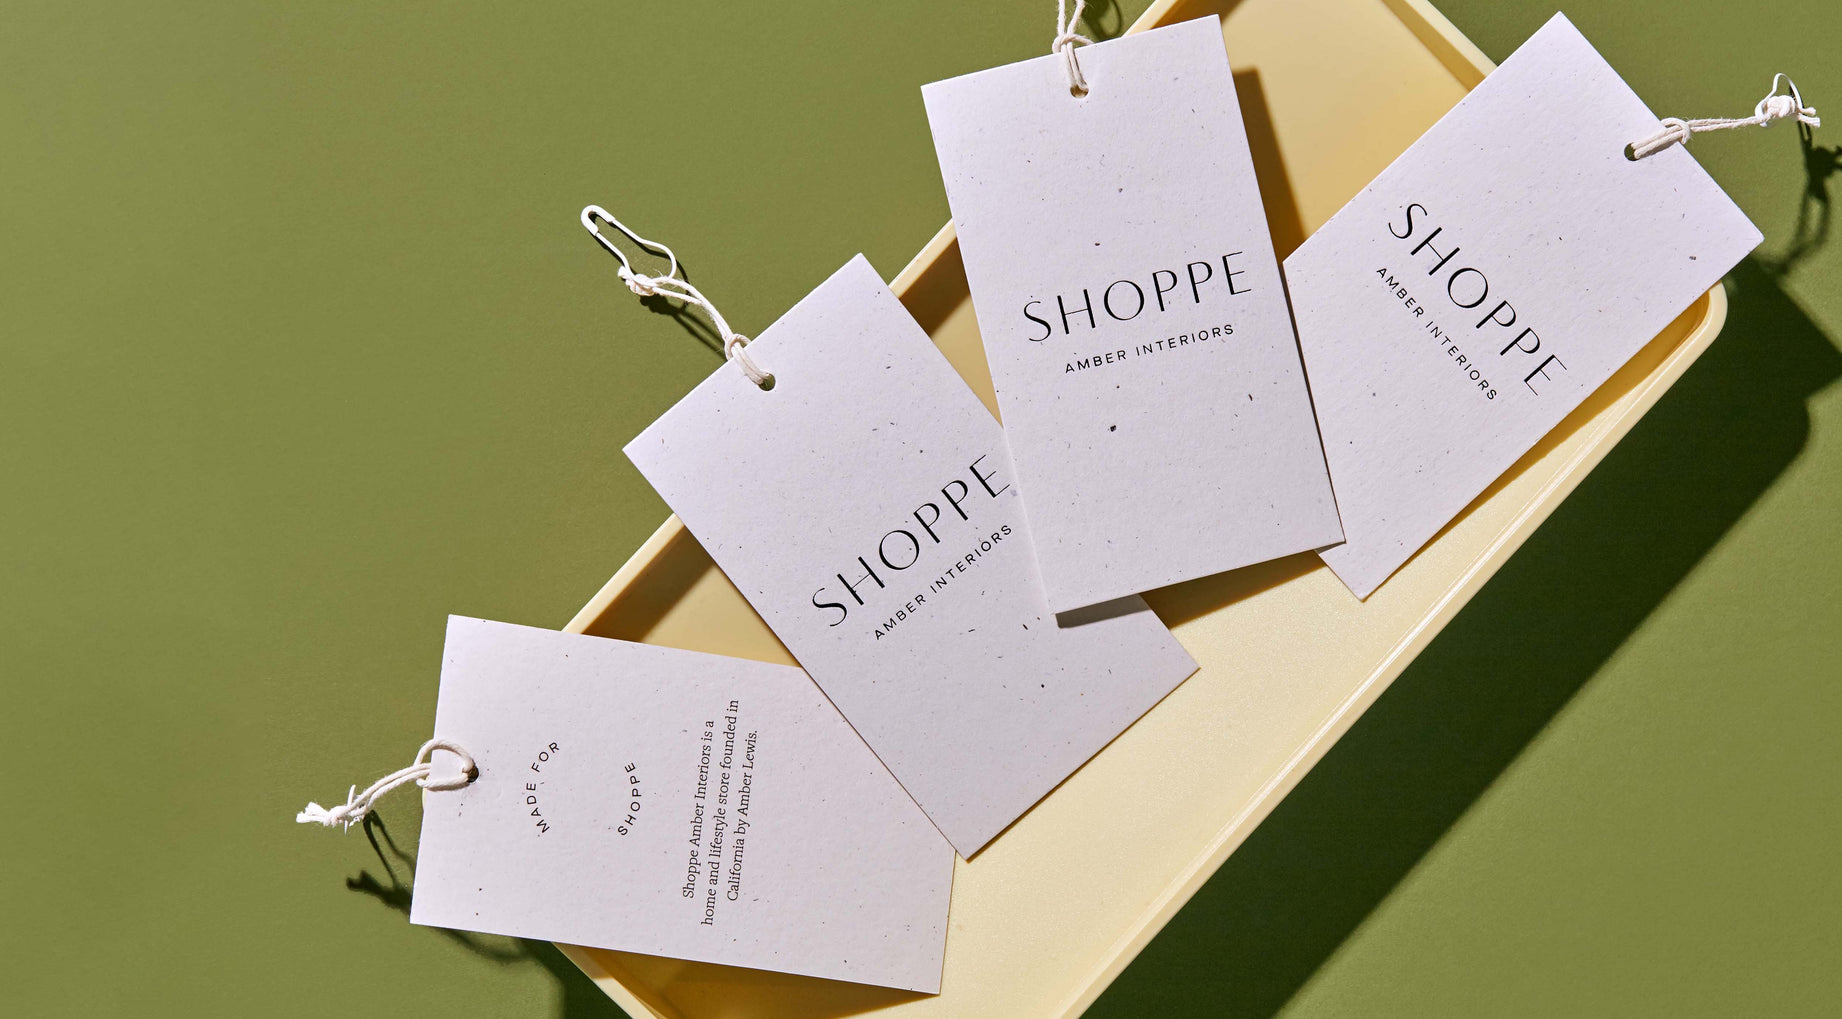 For hang tags worth showing off, up the ante with custom stamping. This tactile effect creates an unparalleled texture and look for the most unique treatment available on our paper goods.